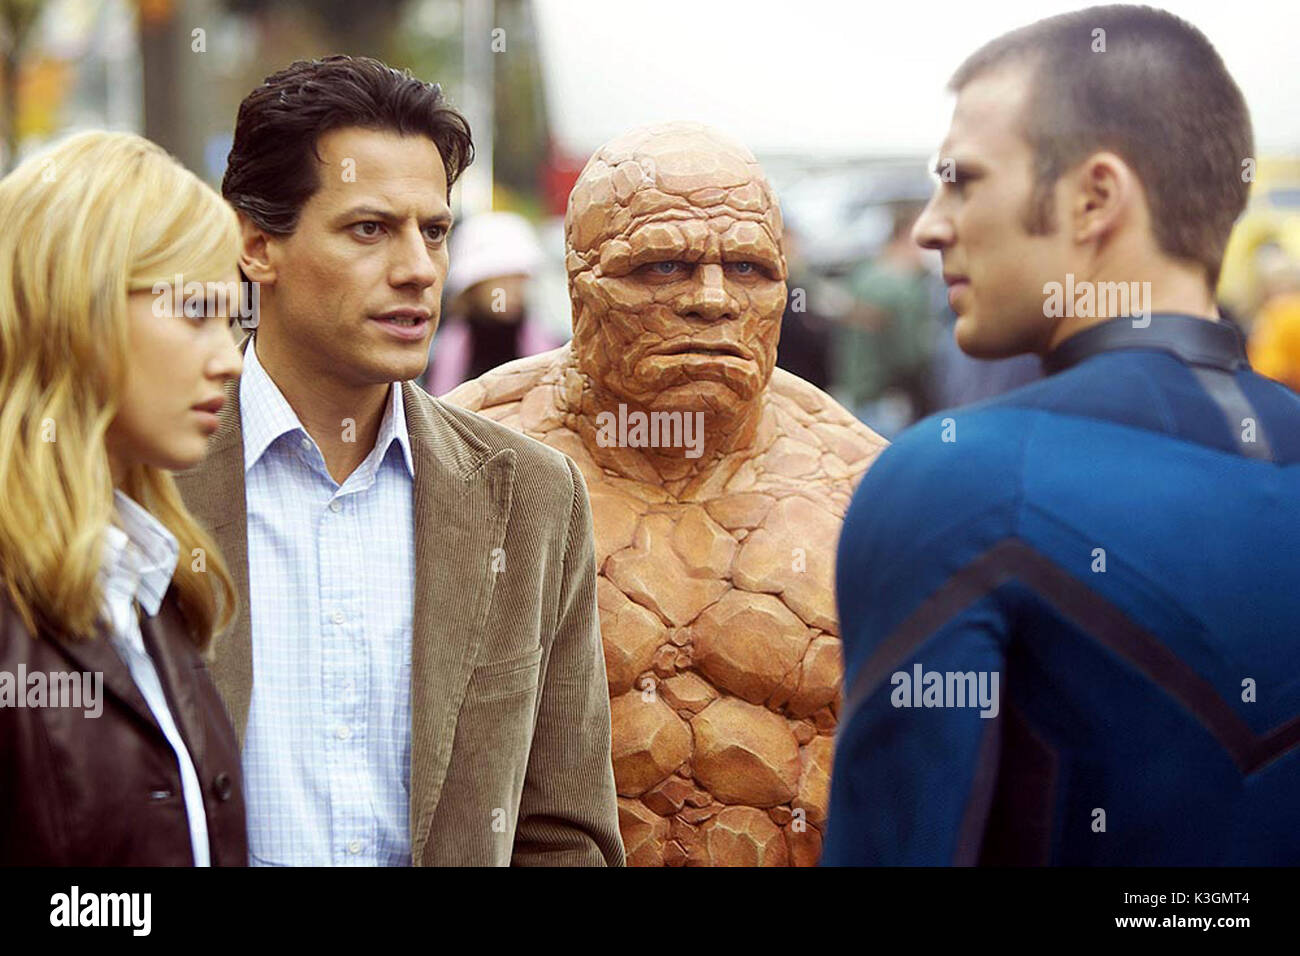 FANTASTIC FOUR JESSICA ALBA as The Invisible Woman, IOAN GRUFFUDD as Mr. Fantastic, MICHAEL CHIKLIS as The Thing, CHRIS EVANS as The Human Torch     Date: 2005 Stock Photo